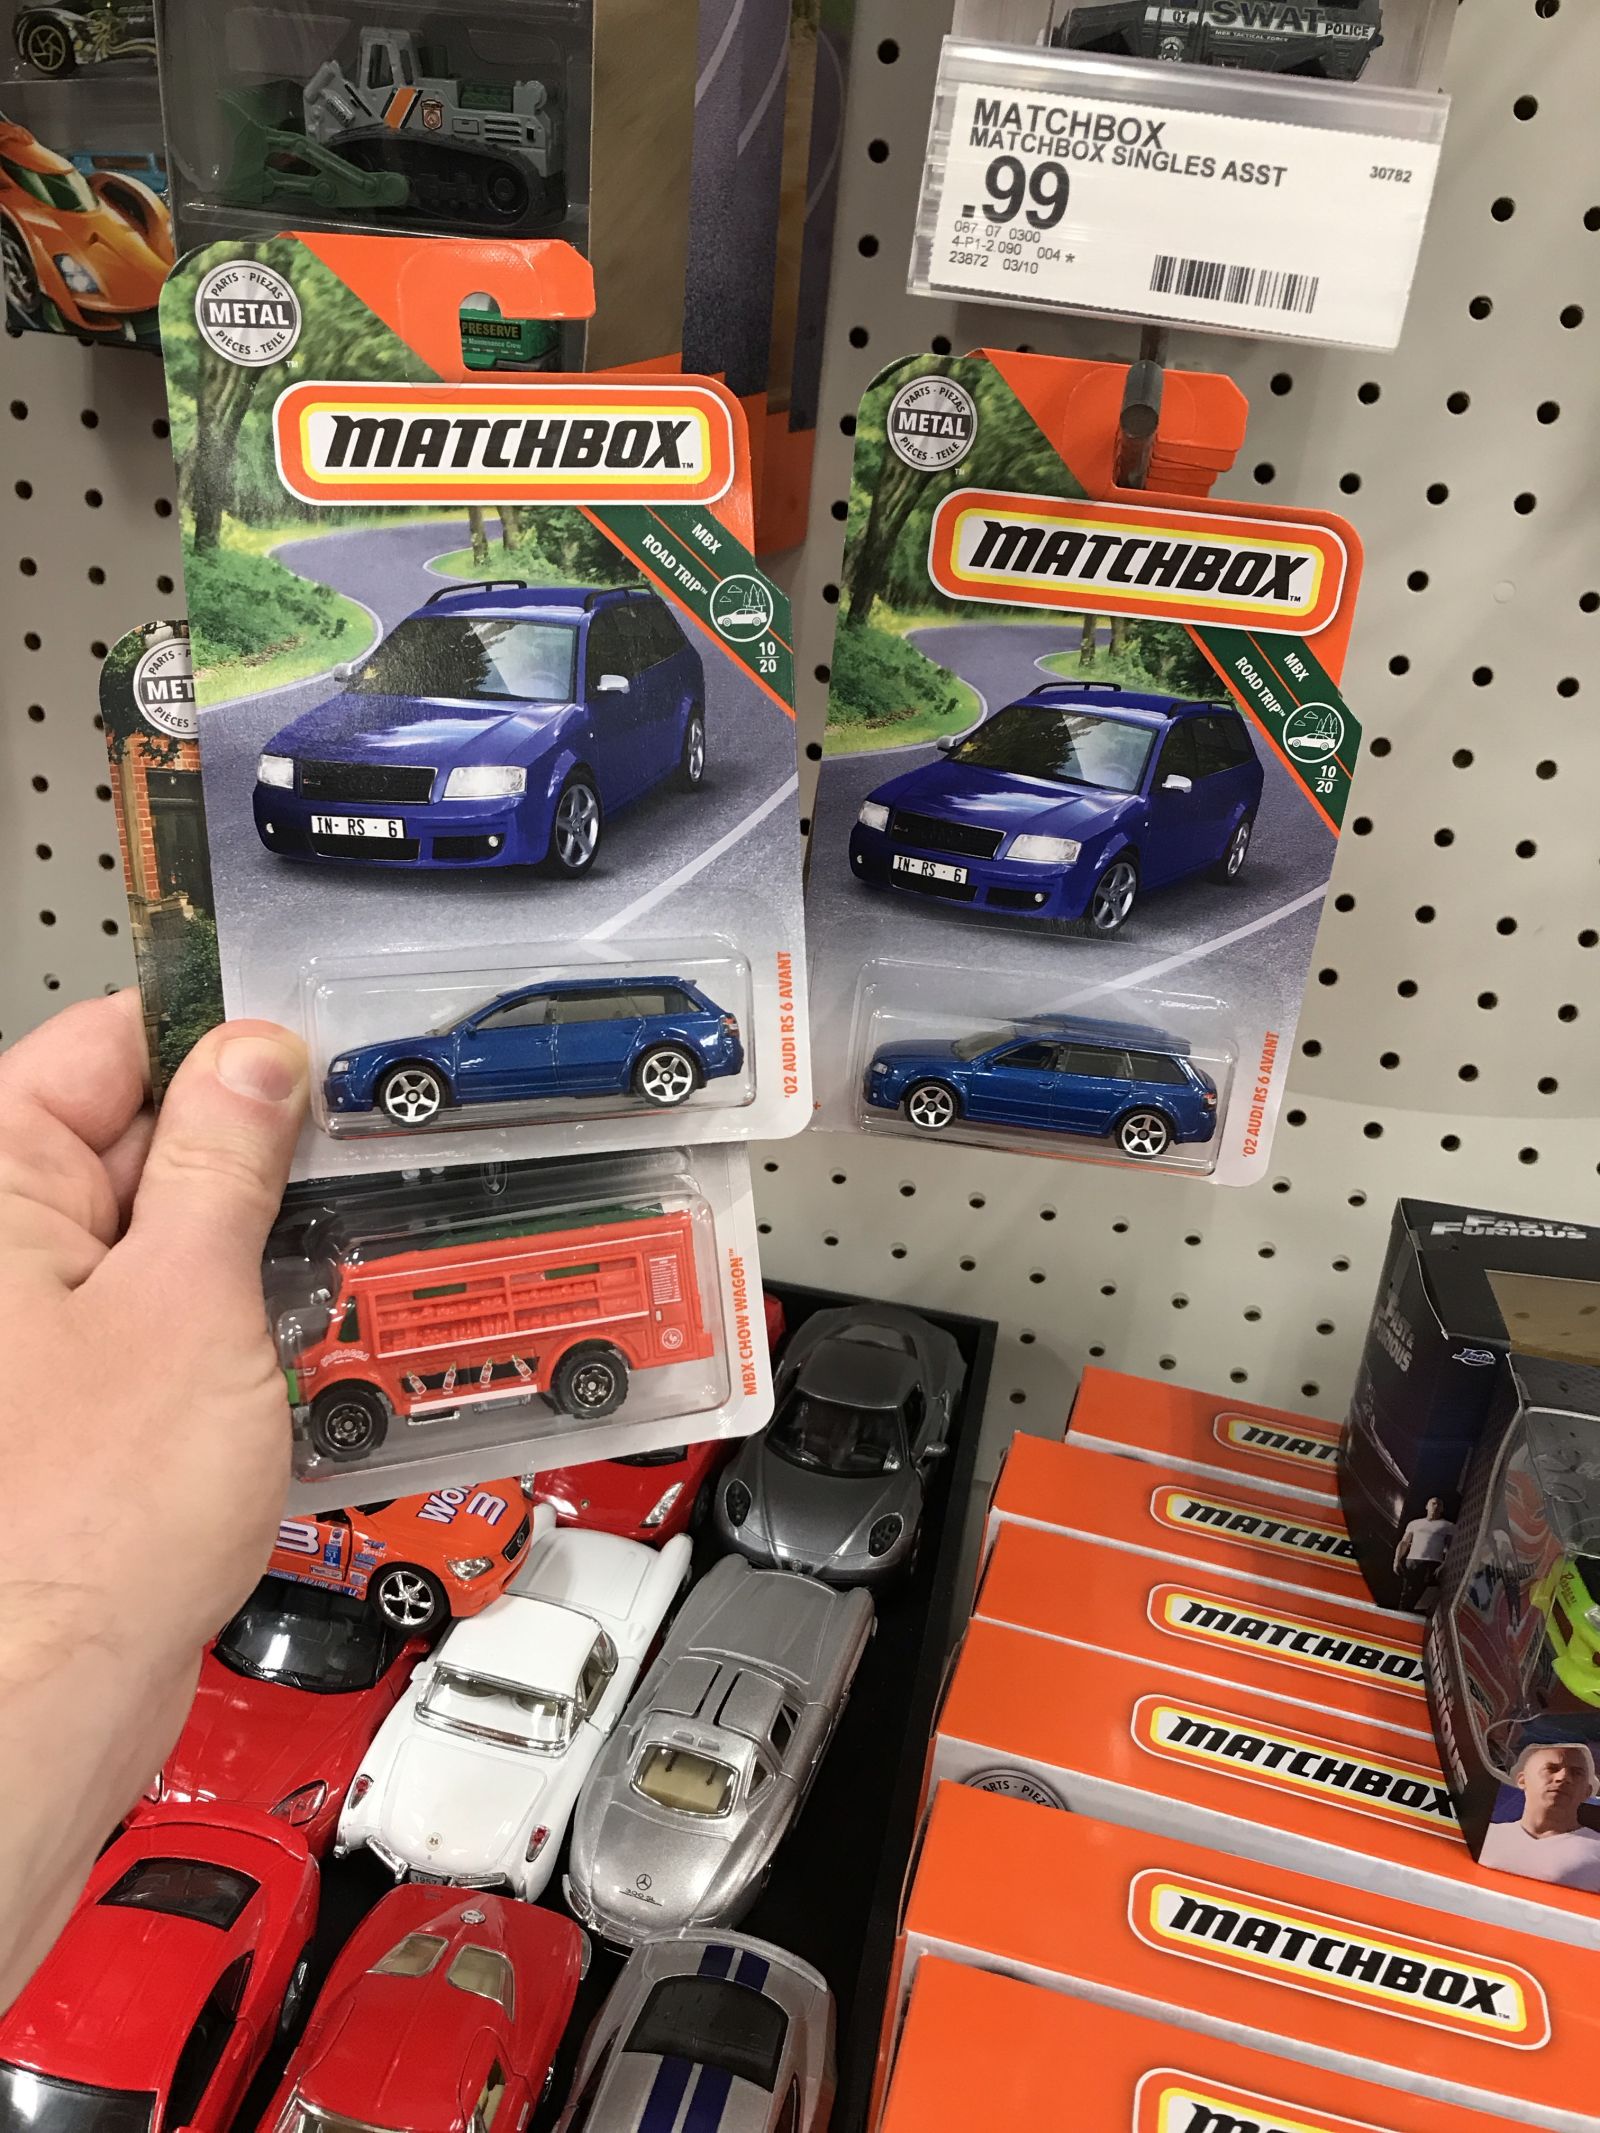 Only grabbed one Audi. Save it for the next collector!